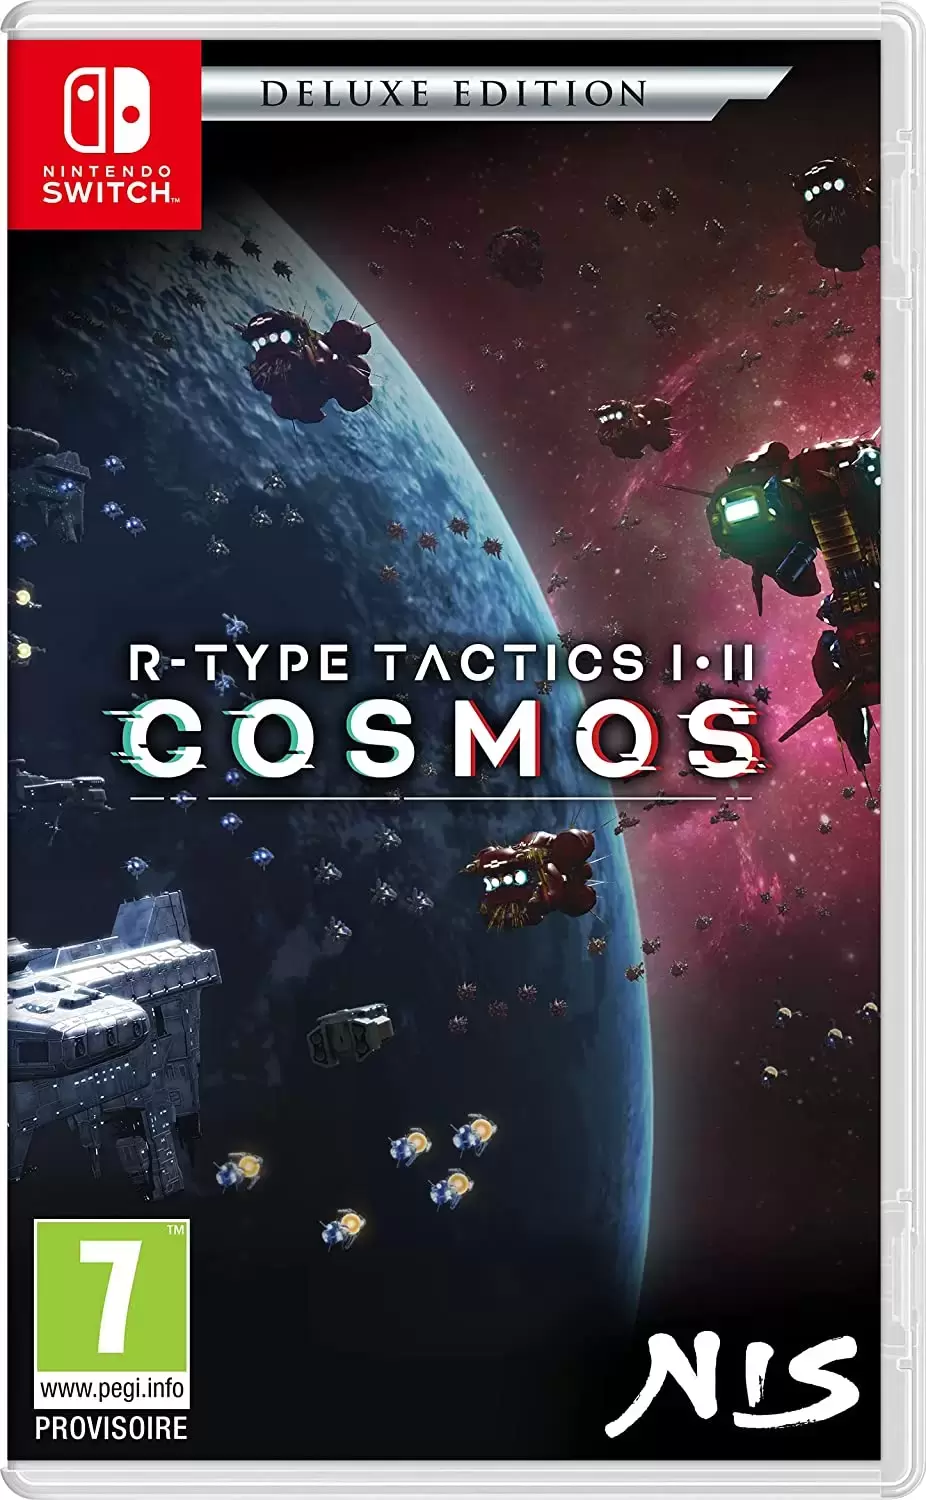 Nintendo Switch Games - R-type Tactics  I & 2 Cosmos - Deluxe Edition